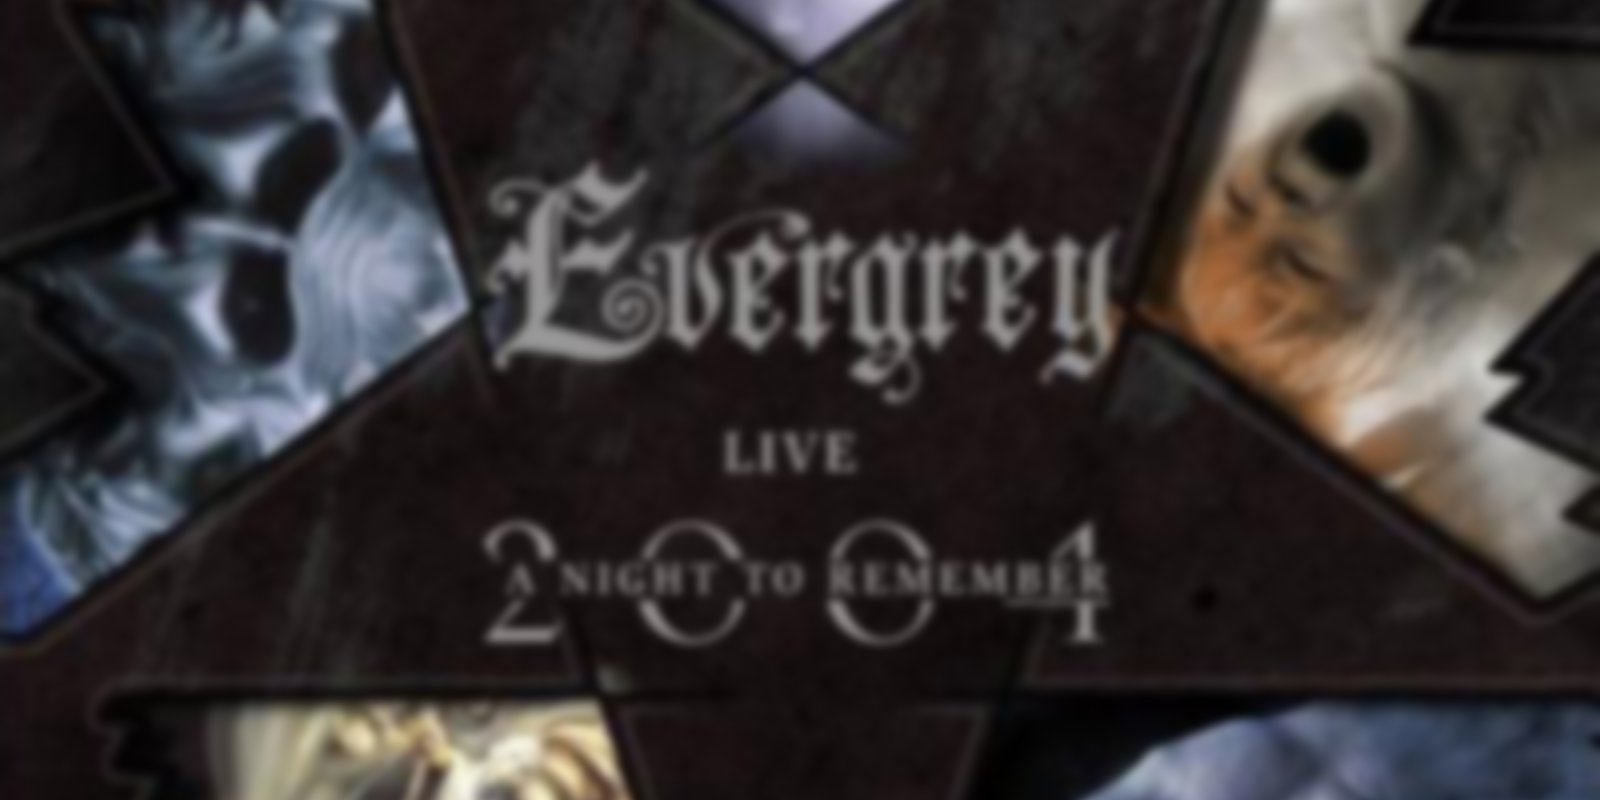 Evergrey - A Night to Remember